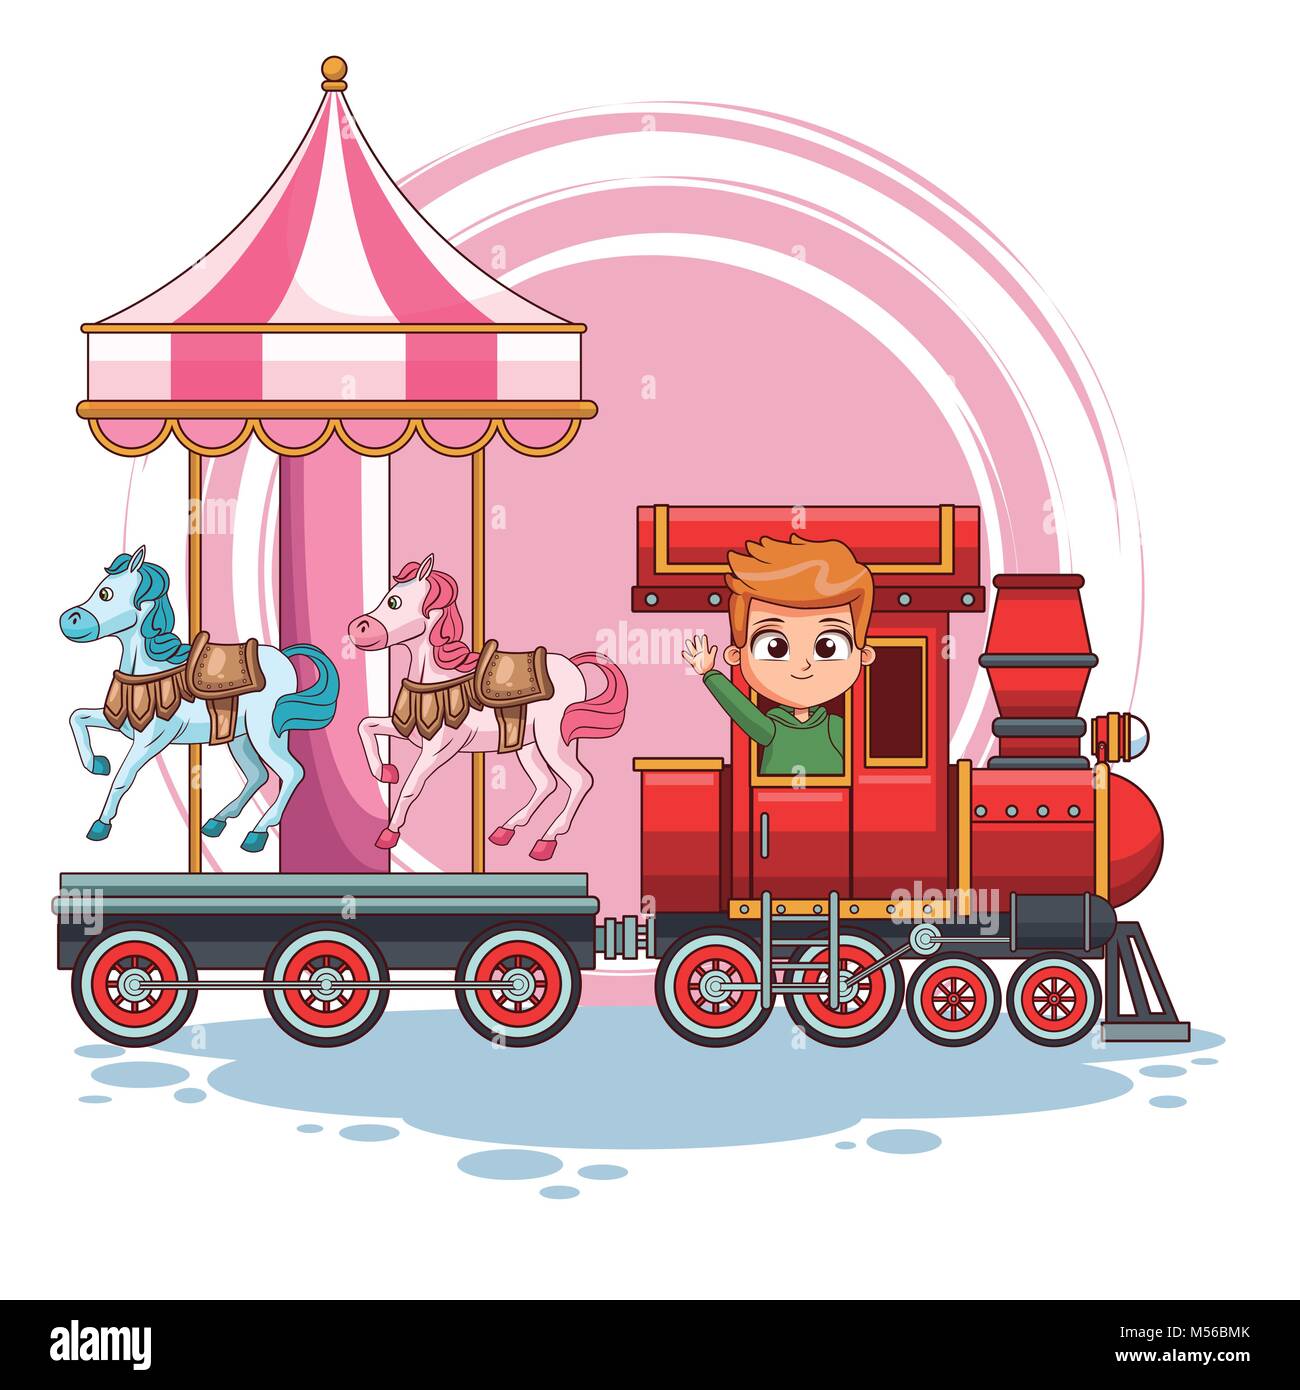 Boy in train with carrousel Stock Vector